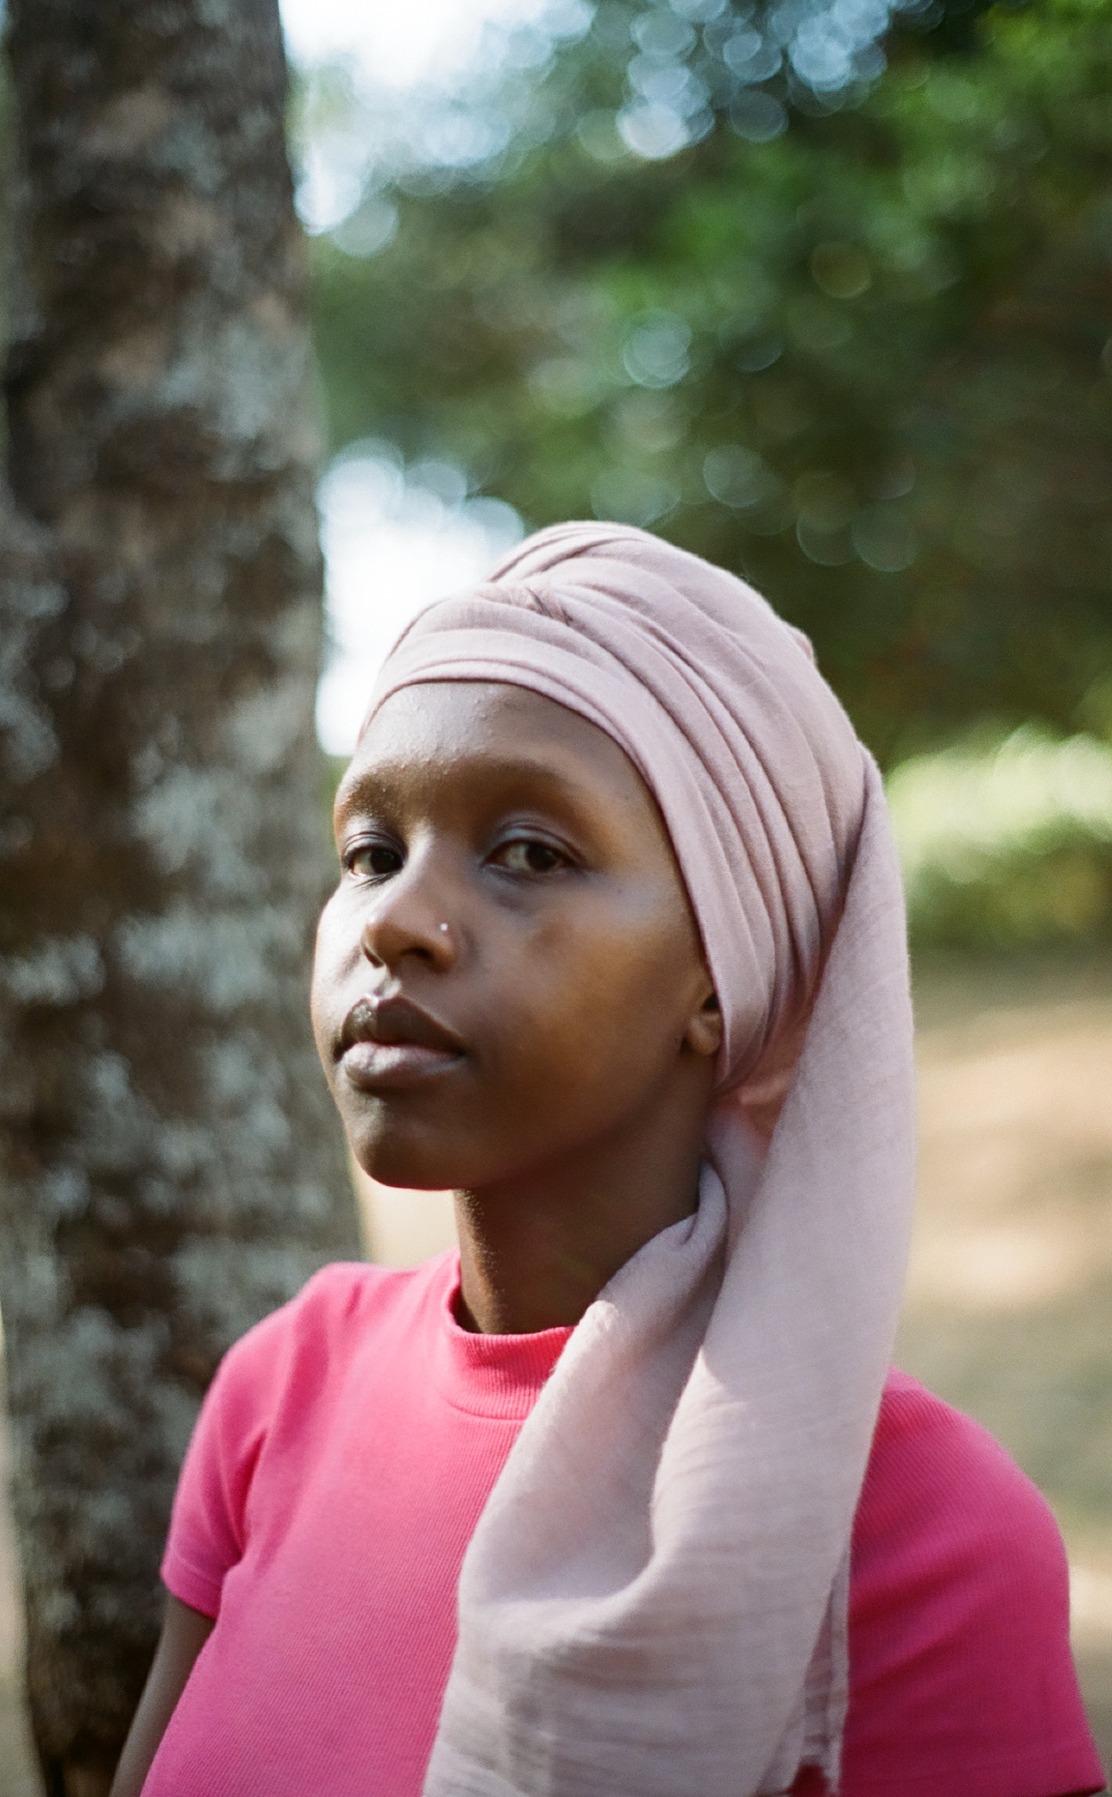 Photo portrait of young African woman wearing pink head scarf and top.